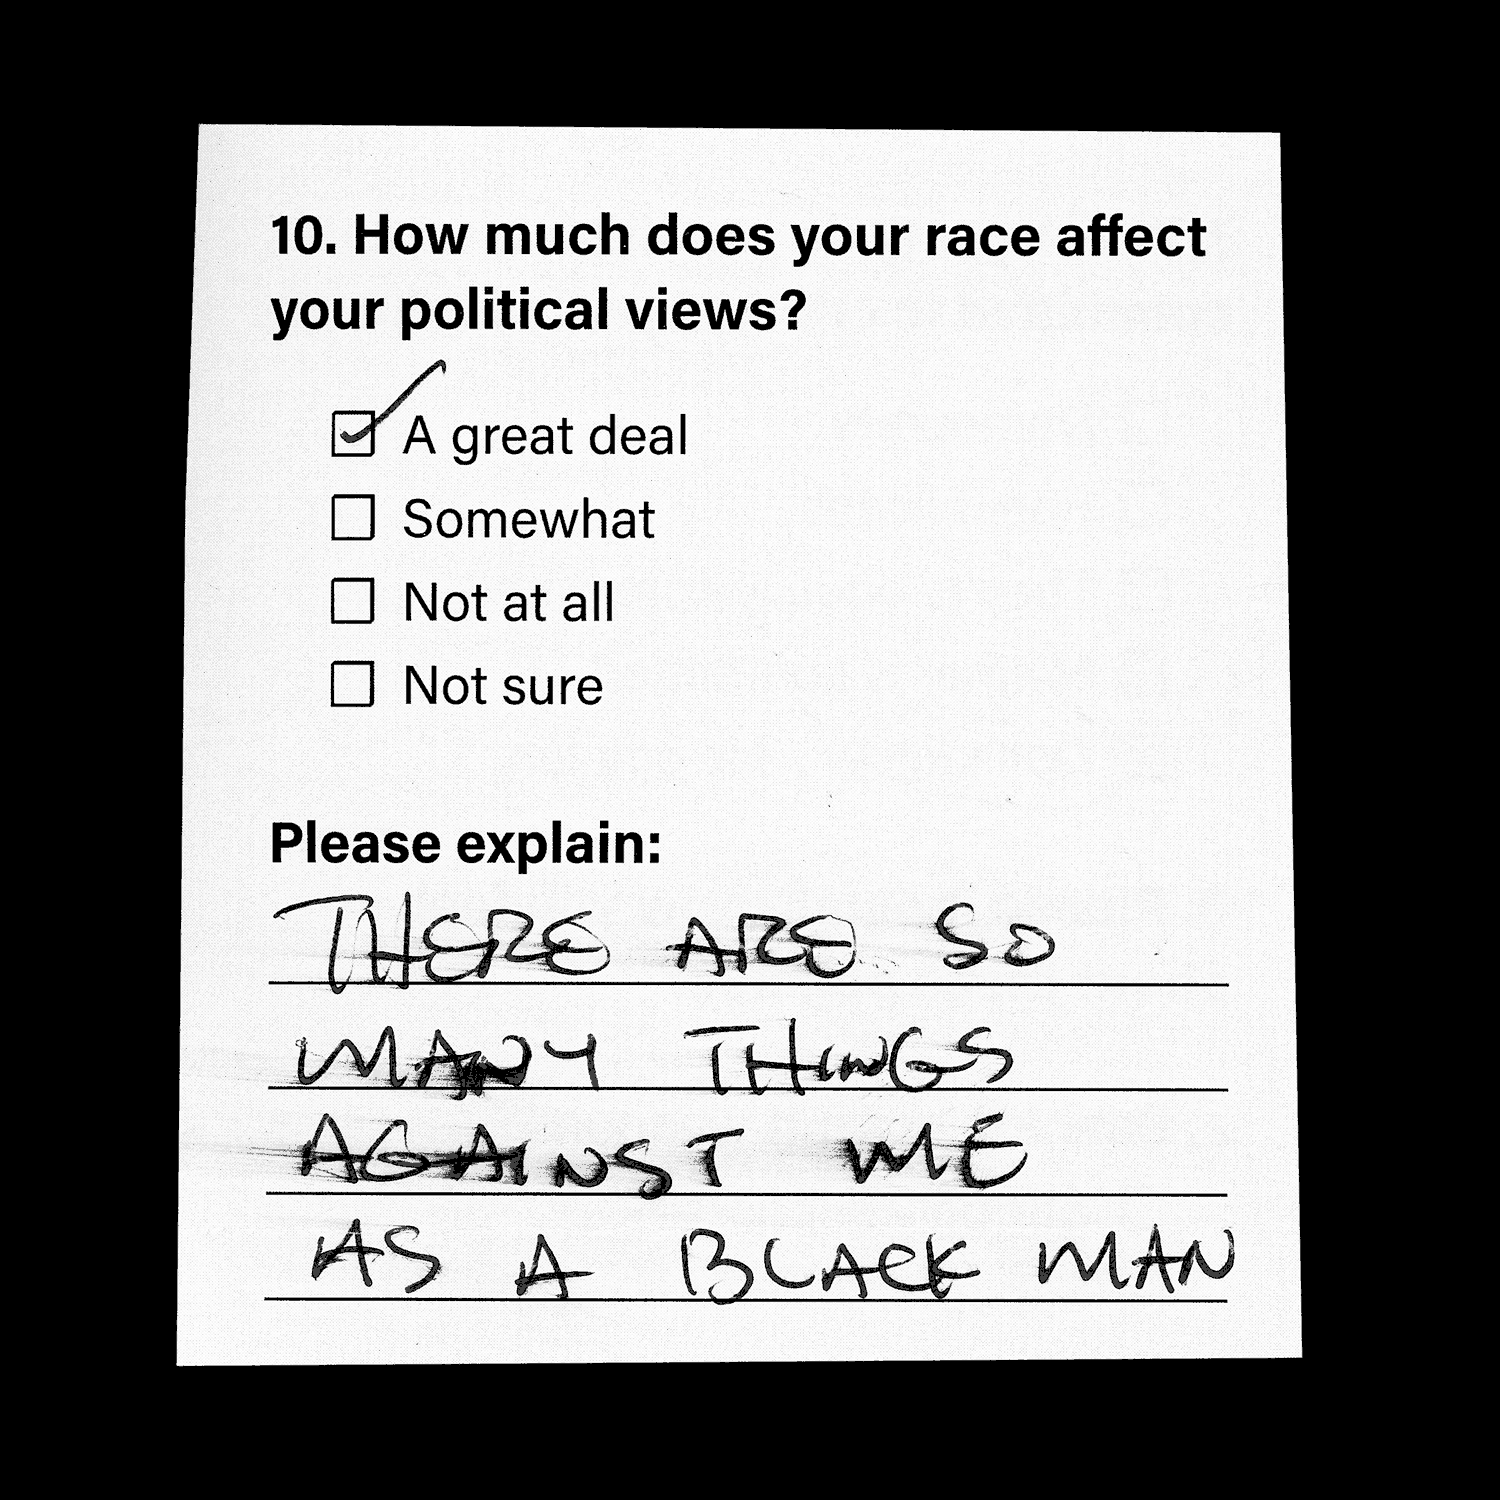 A handwritten response to a question on the survey.